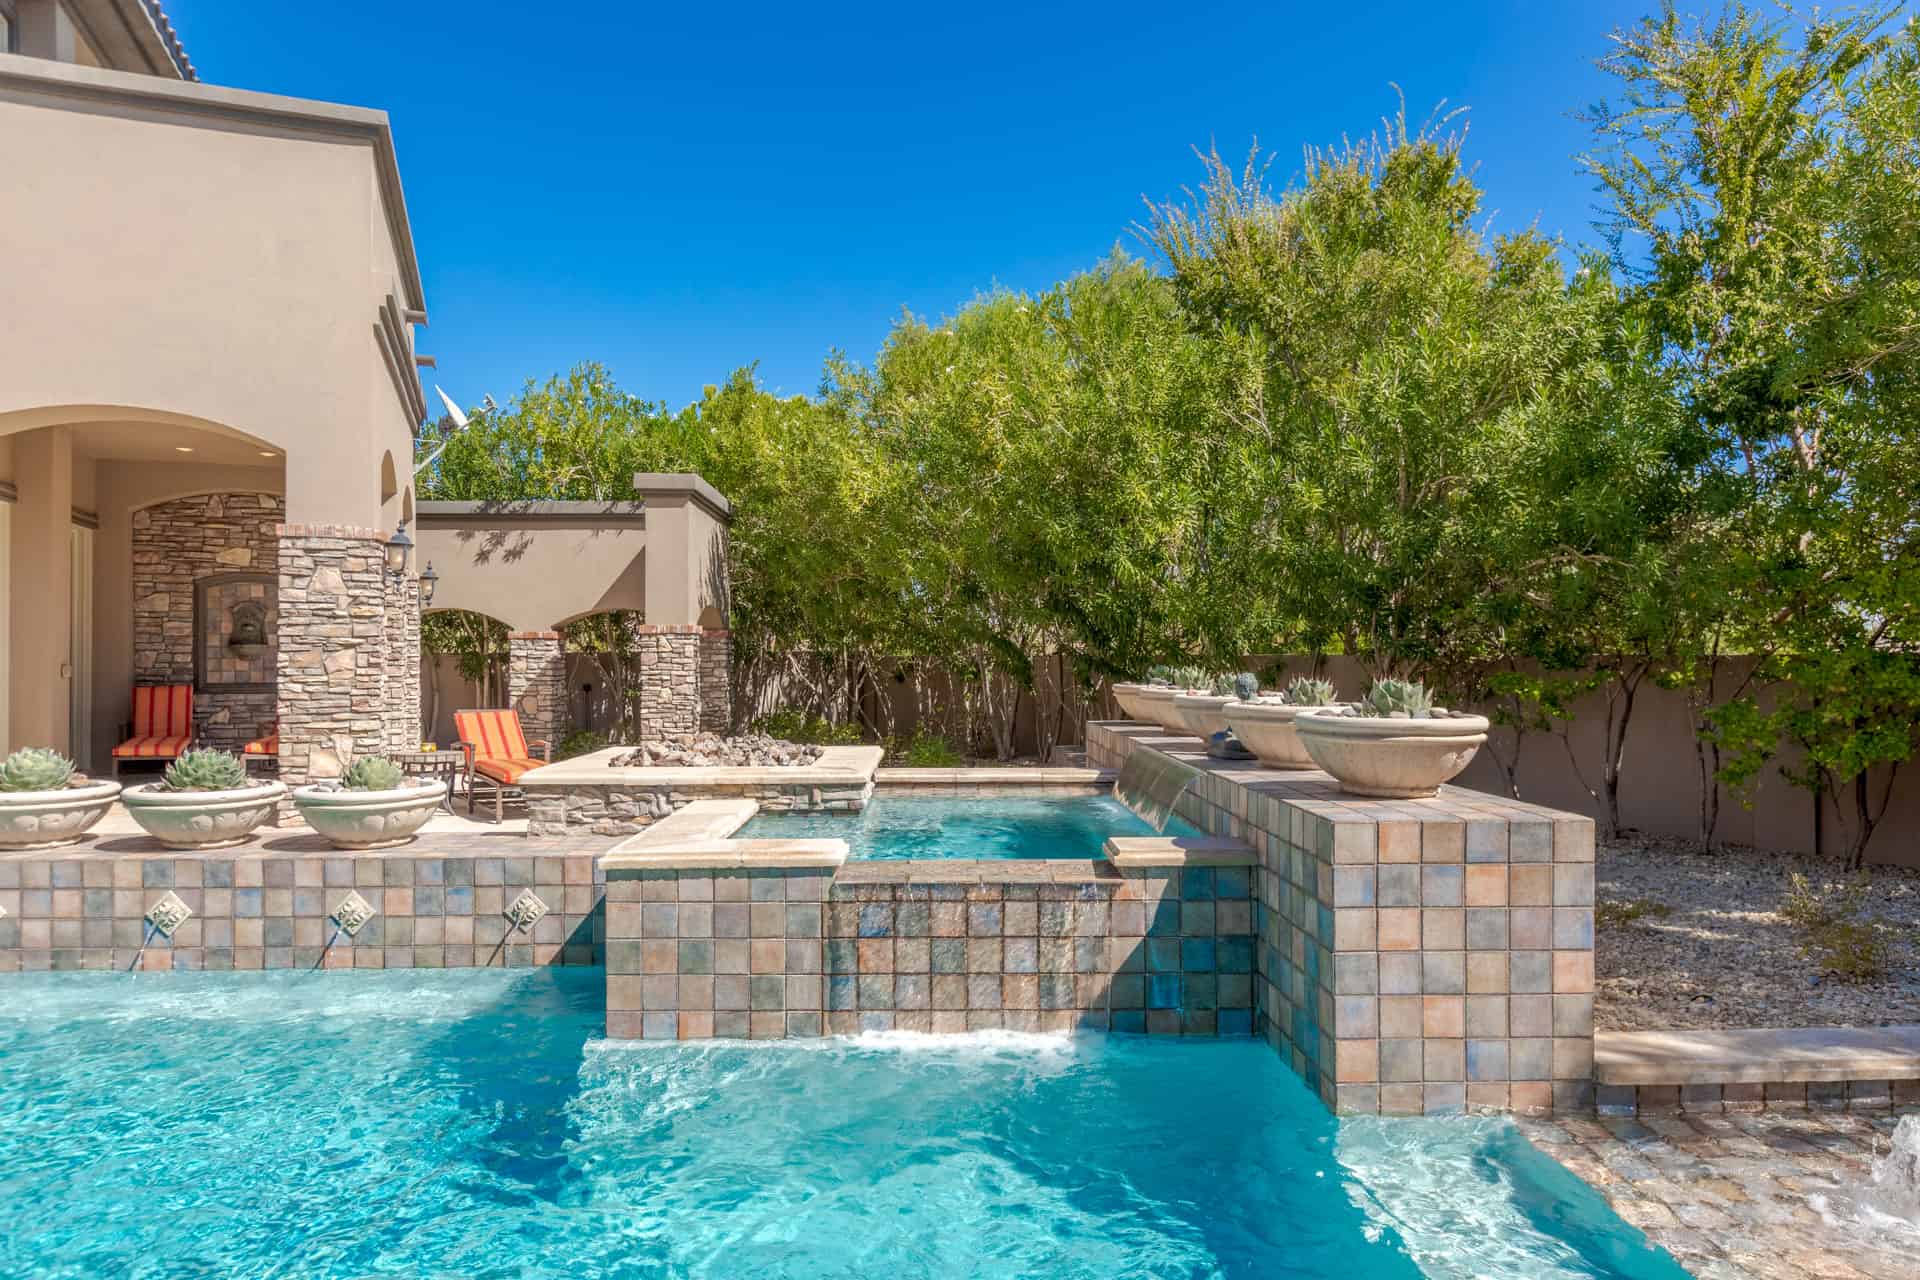 las-vegas-luxry-real-estate-realtor-rob-jensen-company-10981-willow-valley-court-willow-creek6874